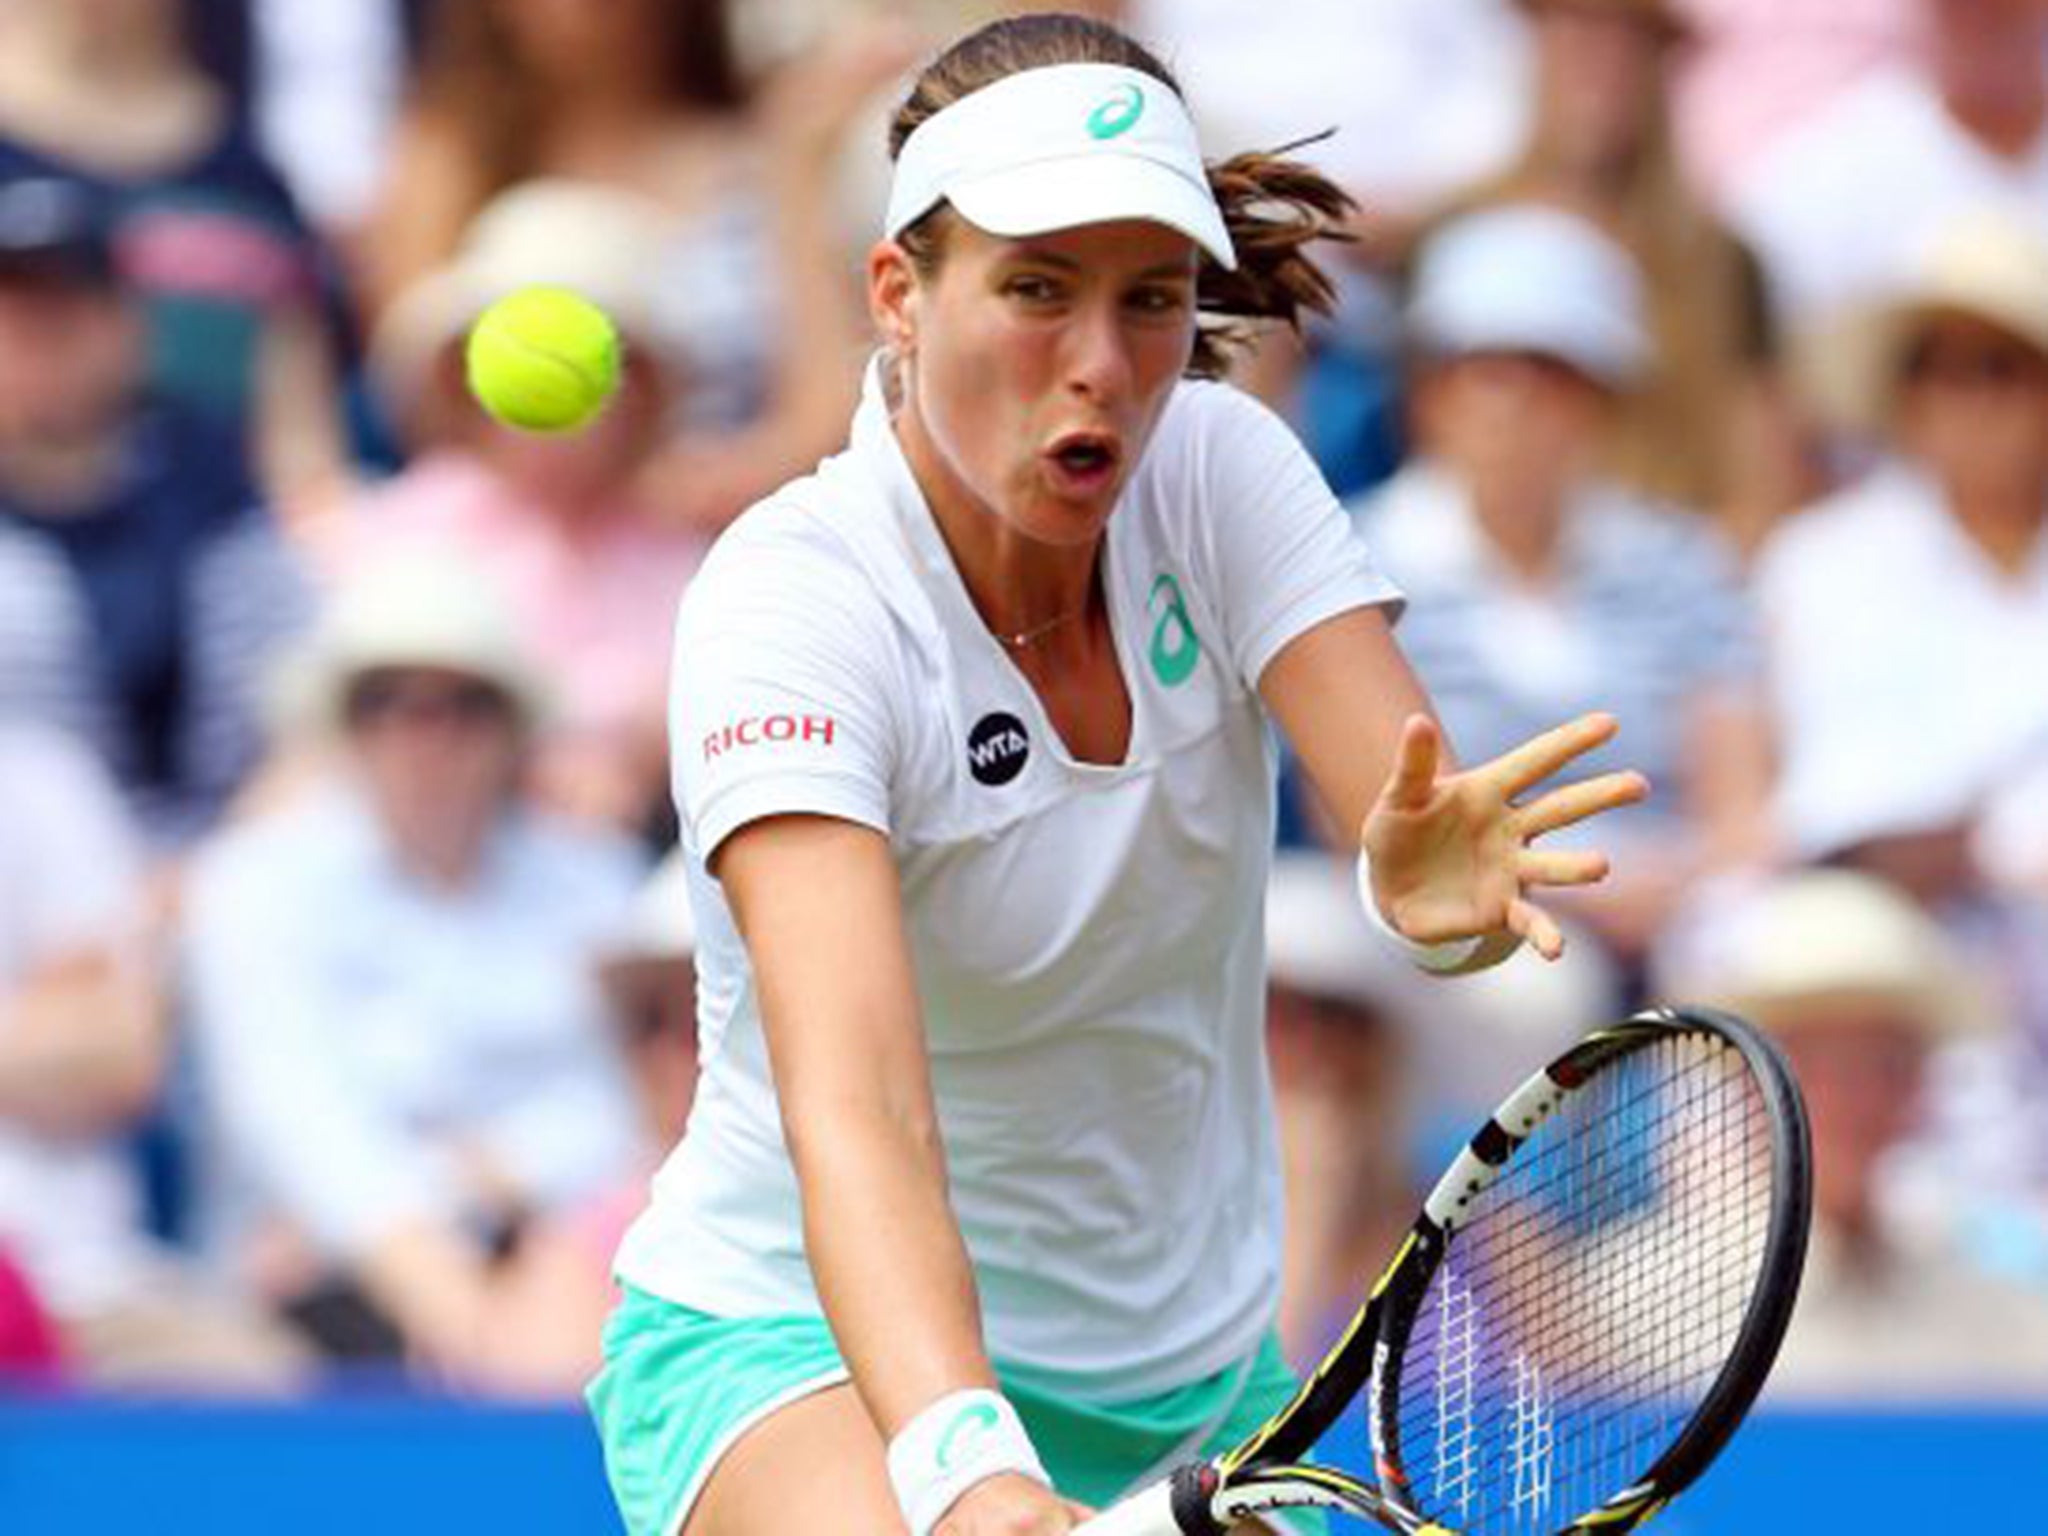 Jo Konta was beaten in three sets by Belinda Bencic at Eastbourne on Thursday